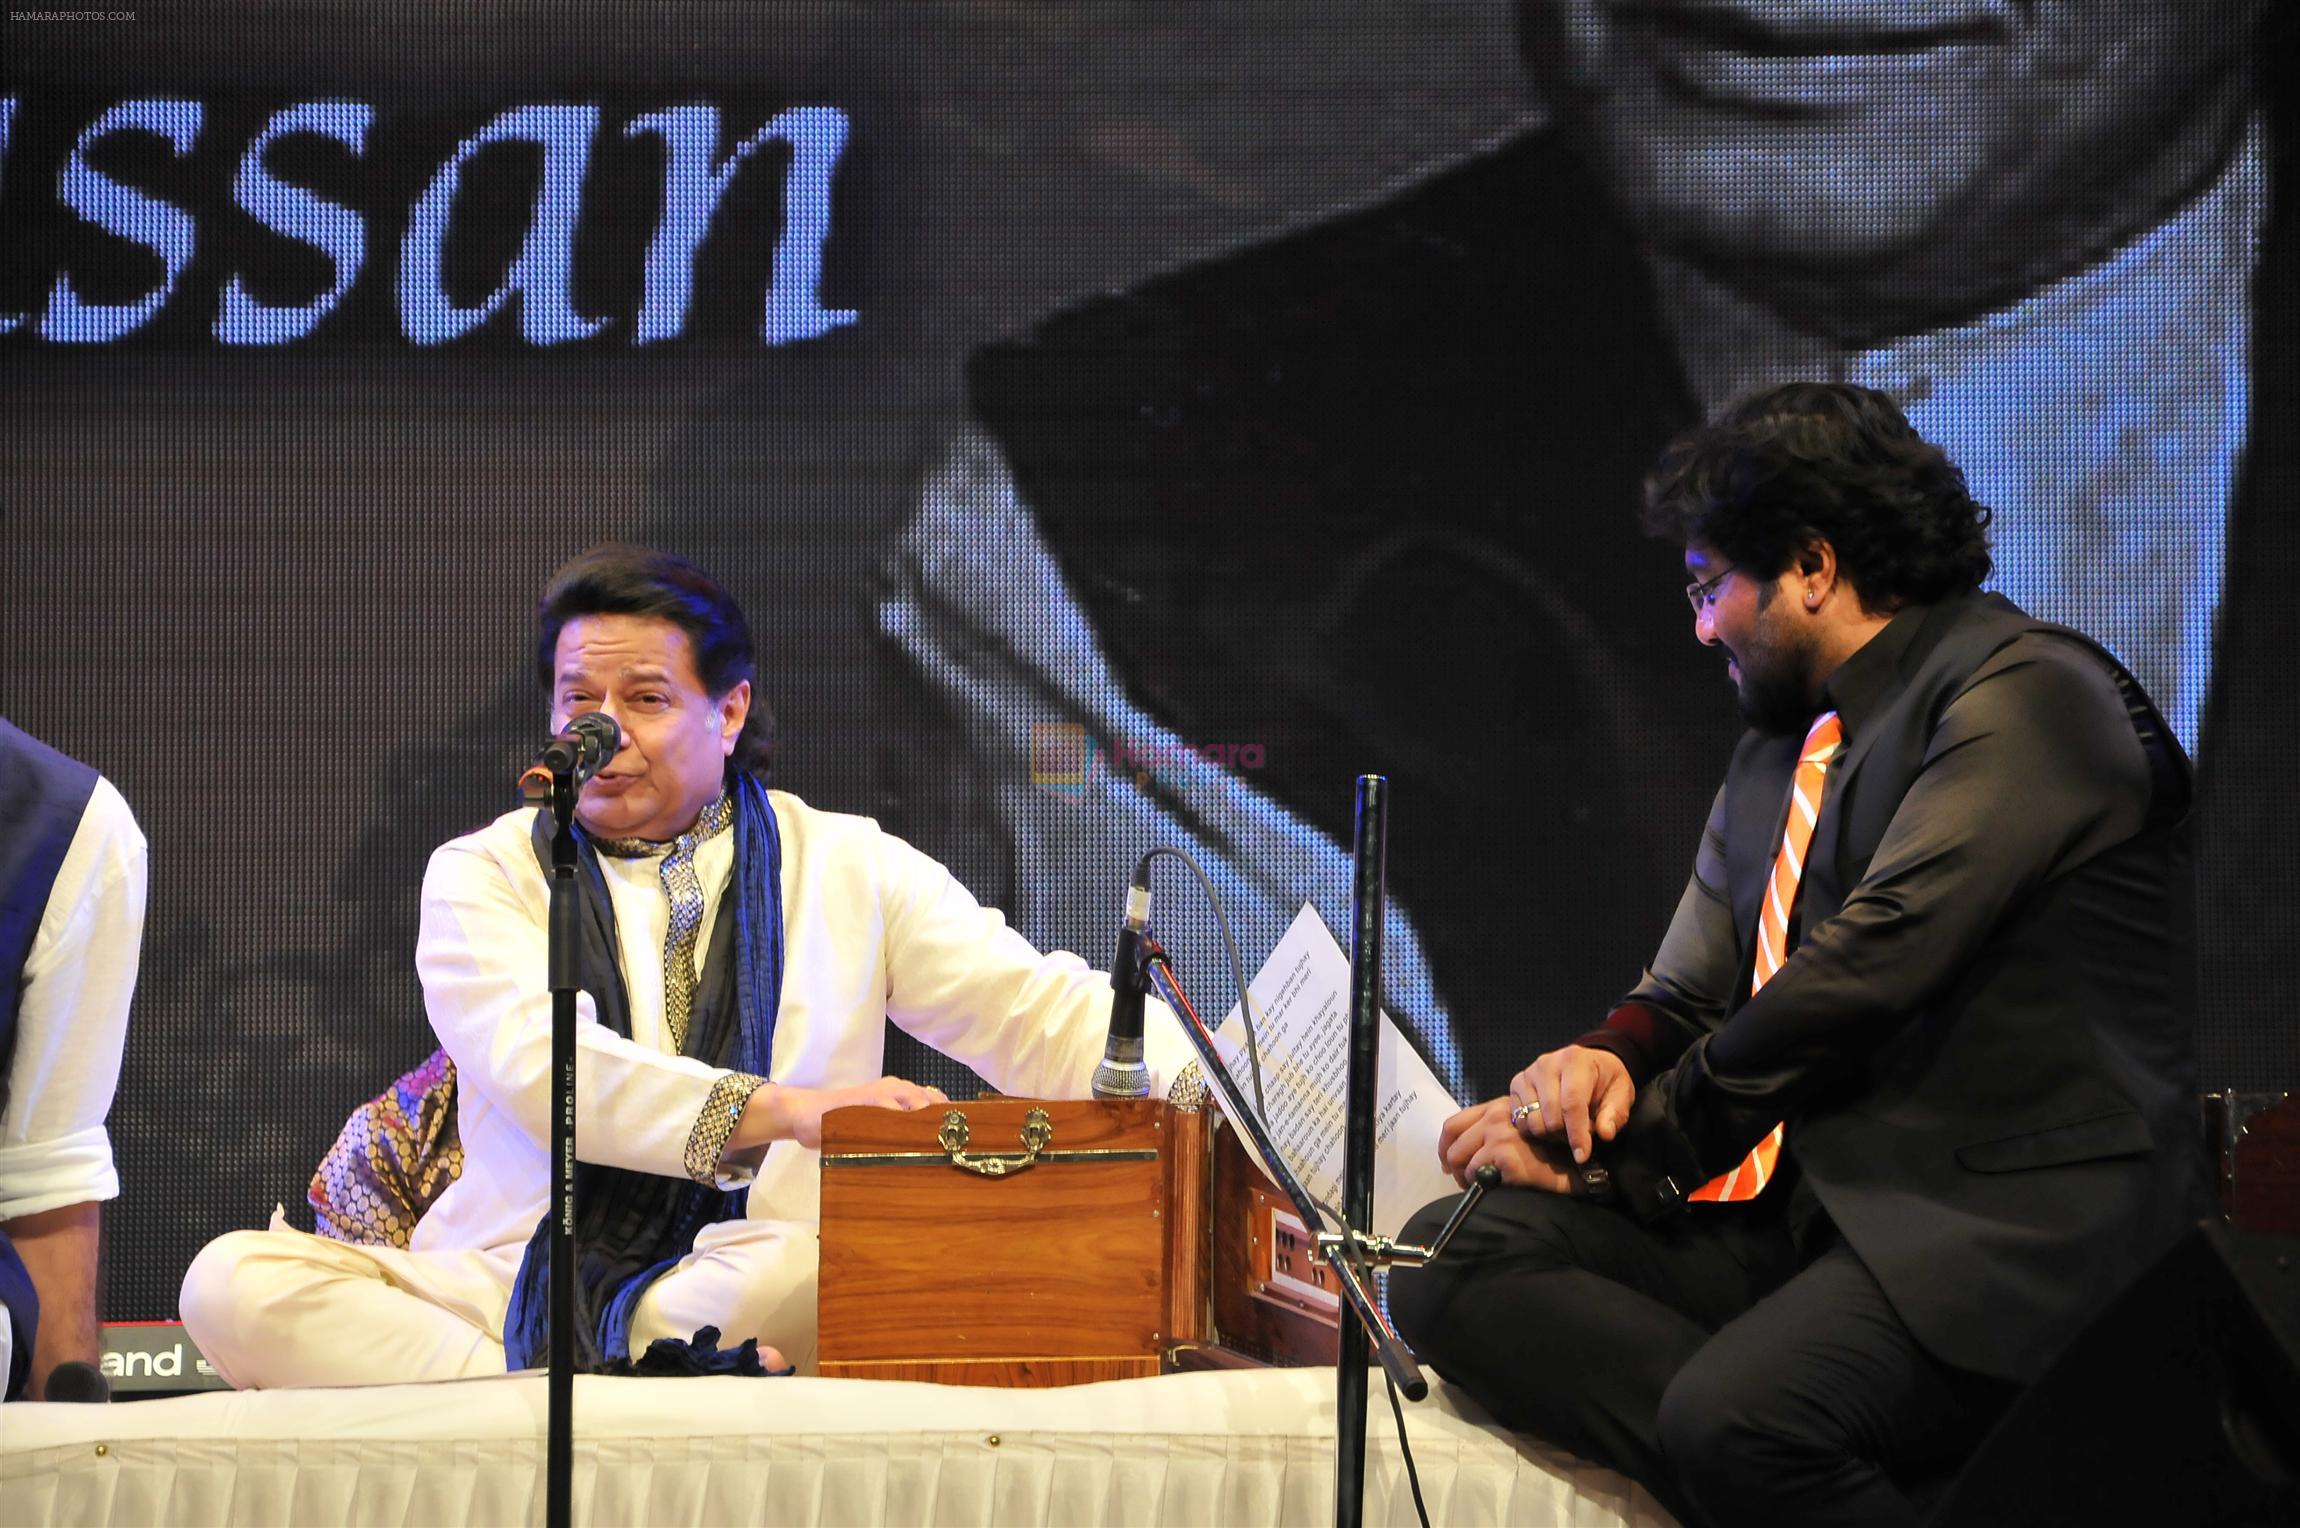 Anup Jalota, babul Supriyo at the Tribute to Jagjit Singh with musical concert Rehmatein in Mumbai on 18th July 2015